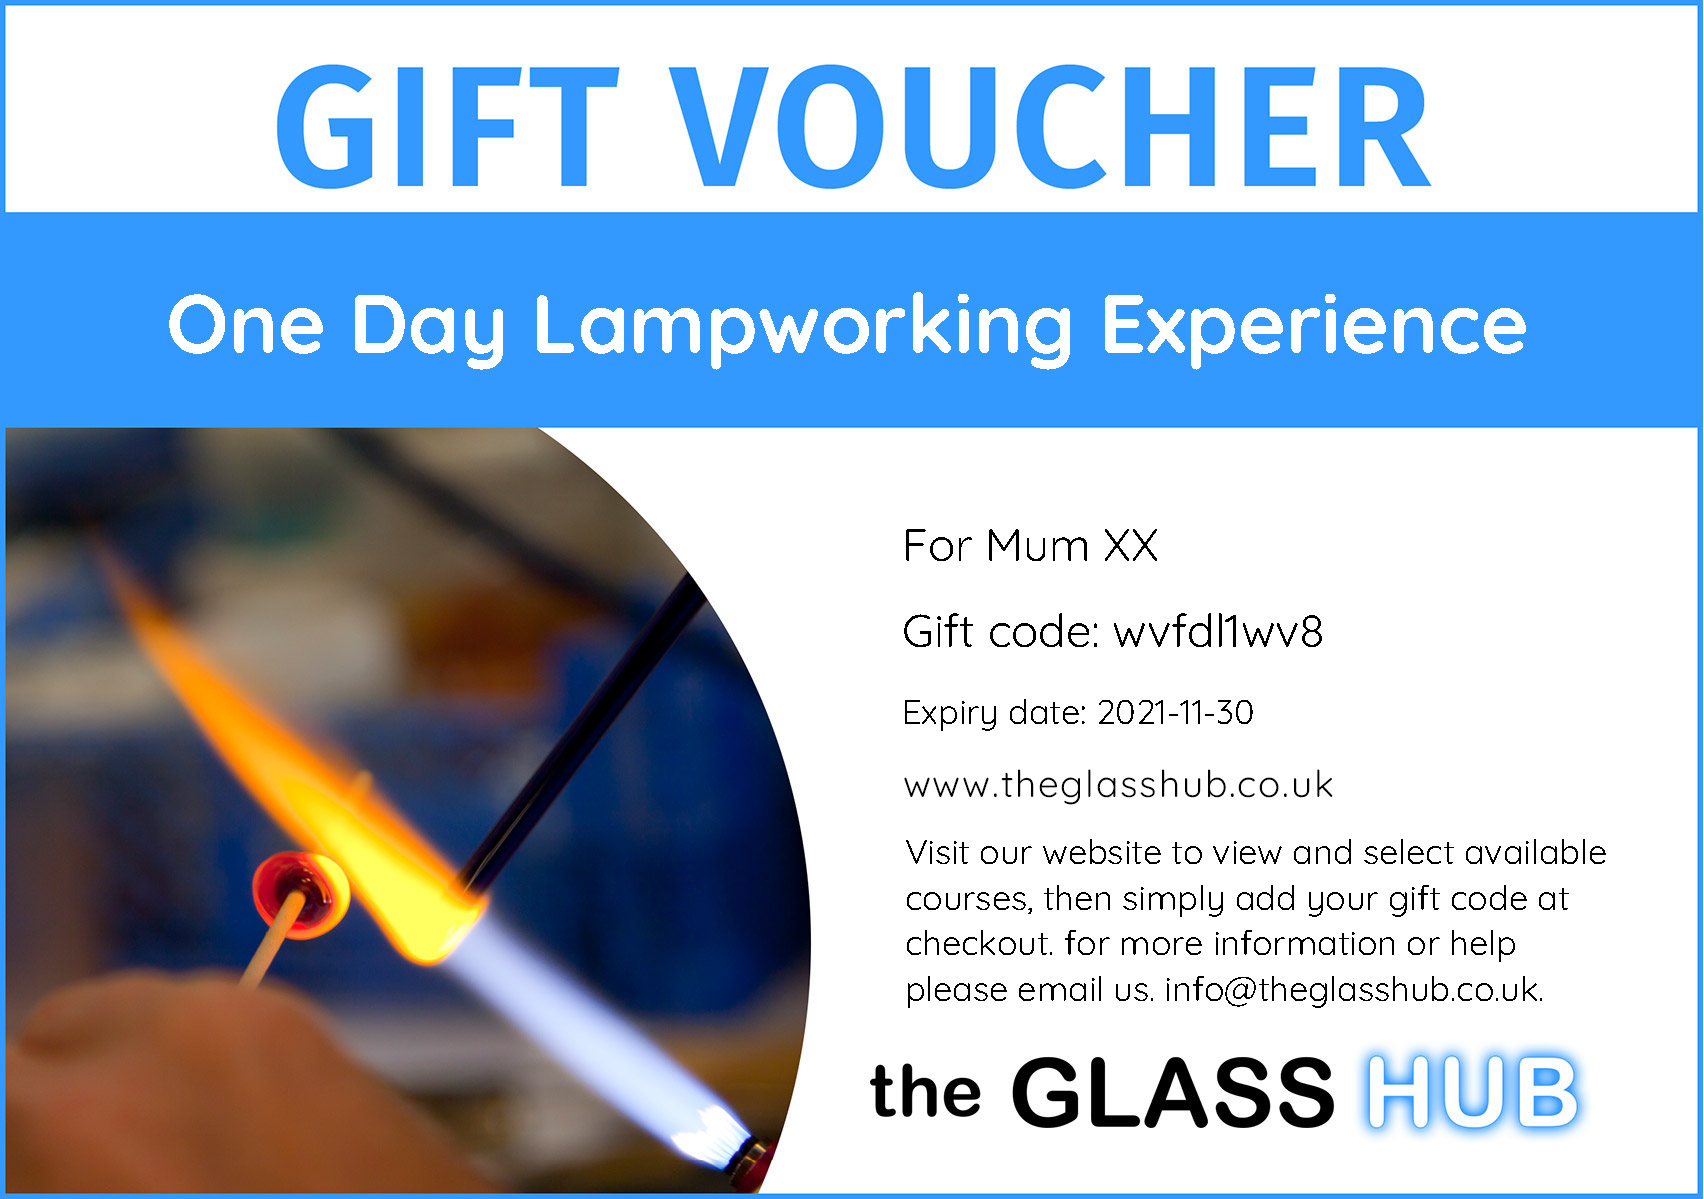 One Day Lampworking Experience